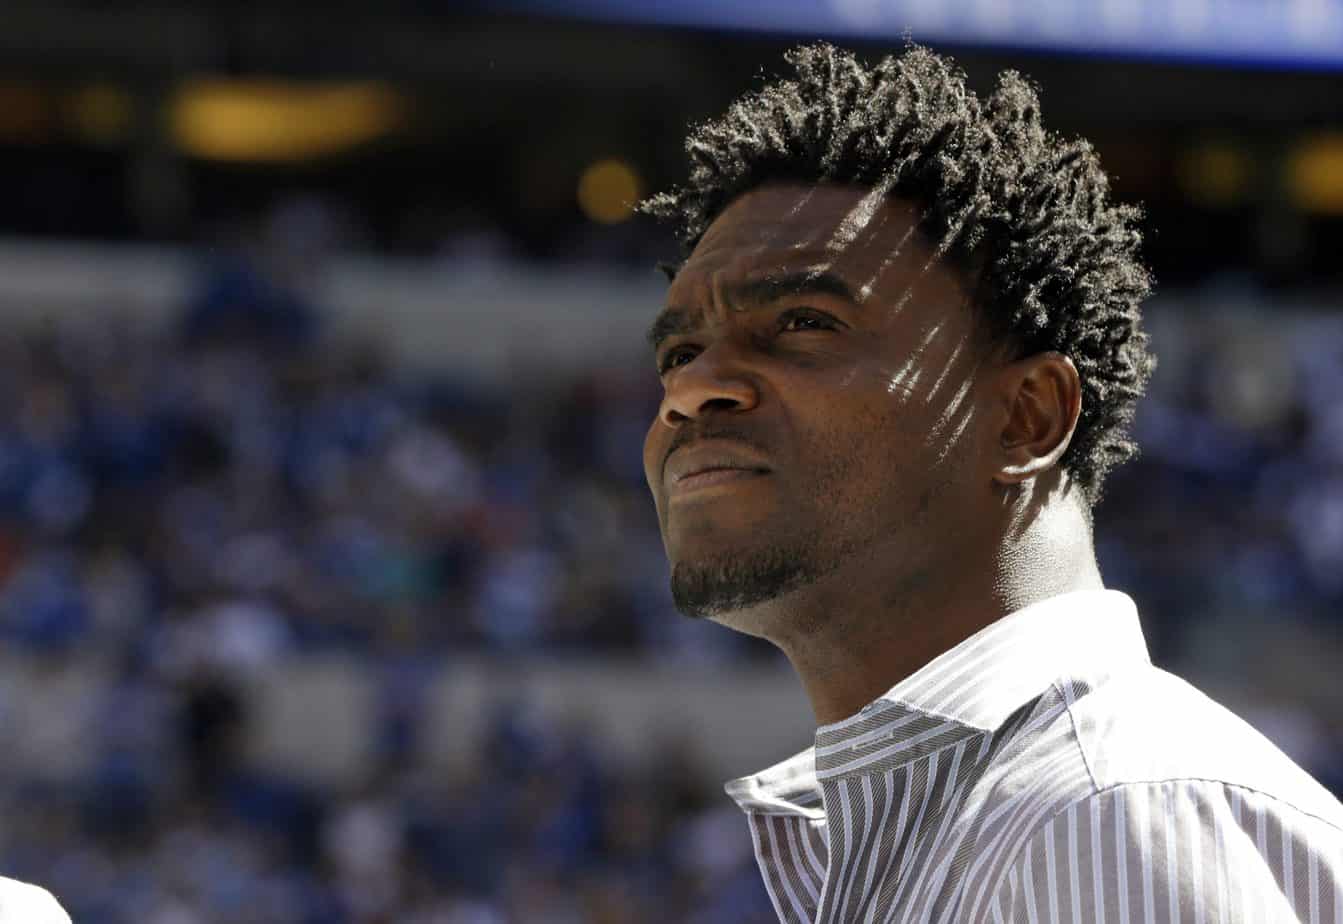 Hall of Fame running back Edgerrin James was issued a warrant this week after failing to appear in a case involving a business dispute in Atlanta